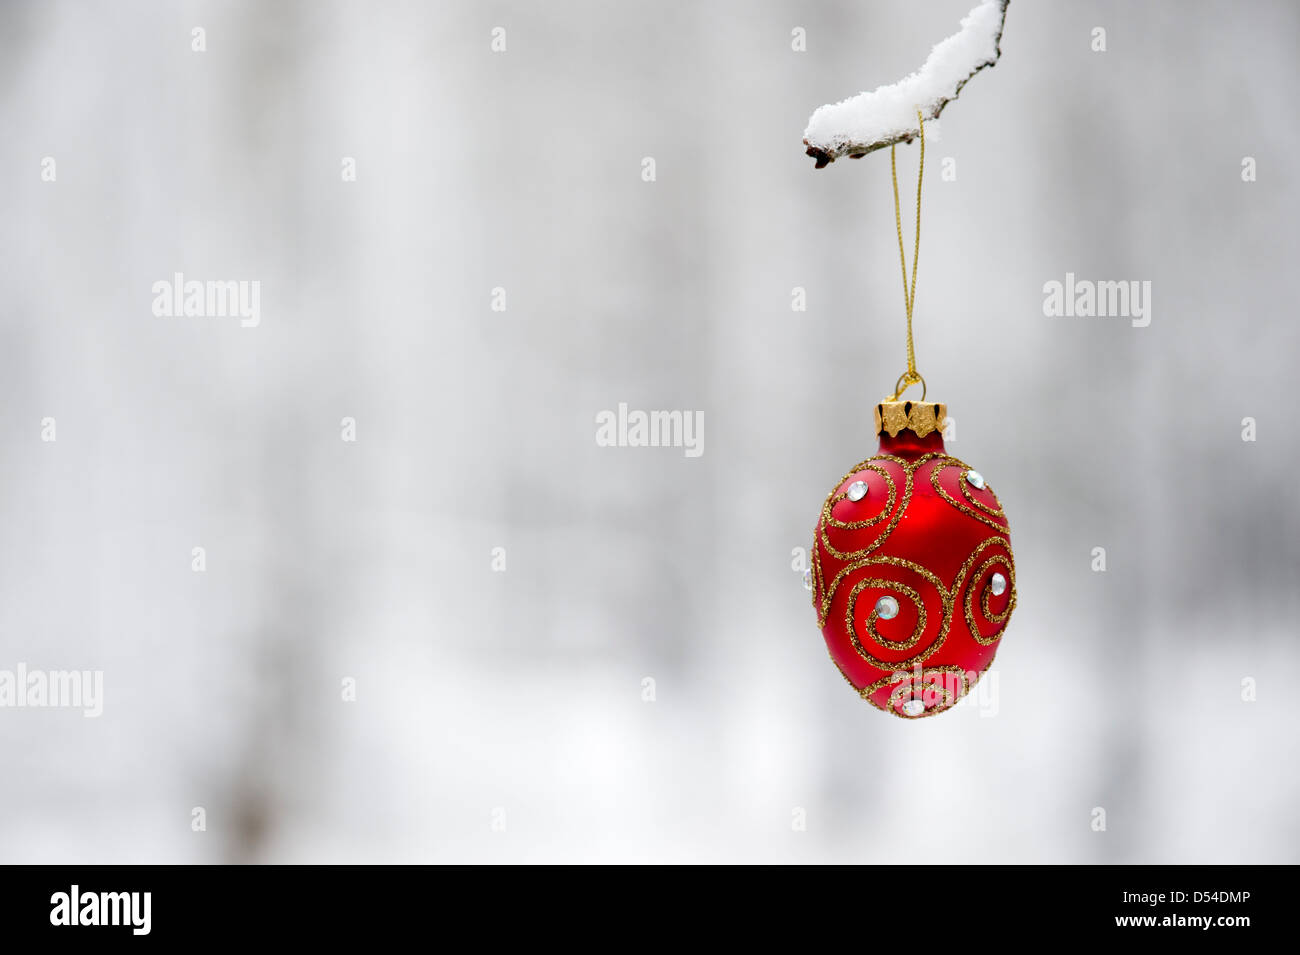 Christmas tree decorations / baubles hanging on a tree branch in the snow Stock Photo